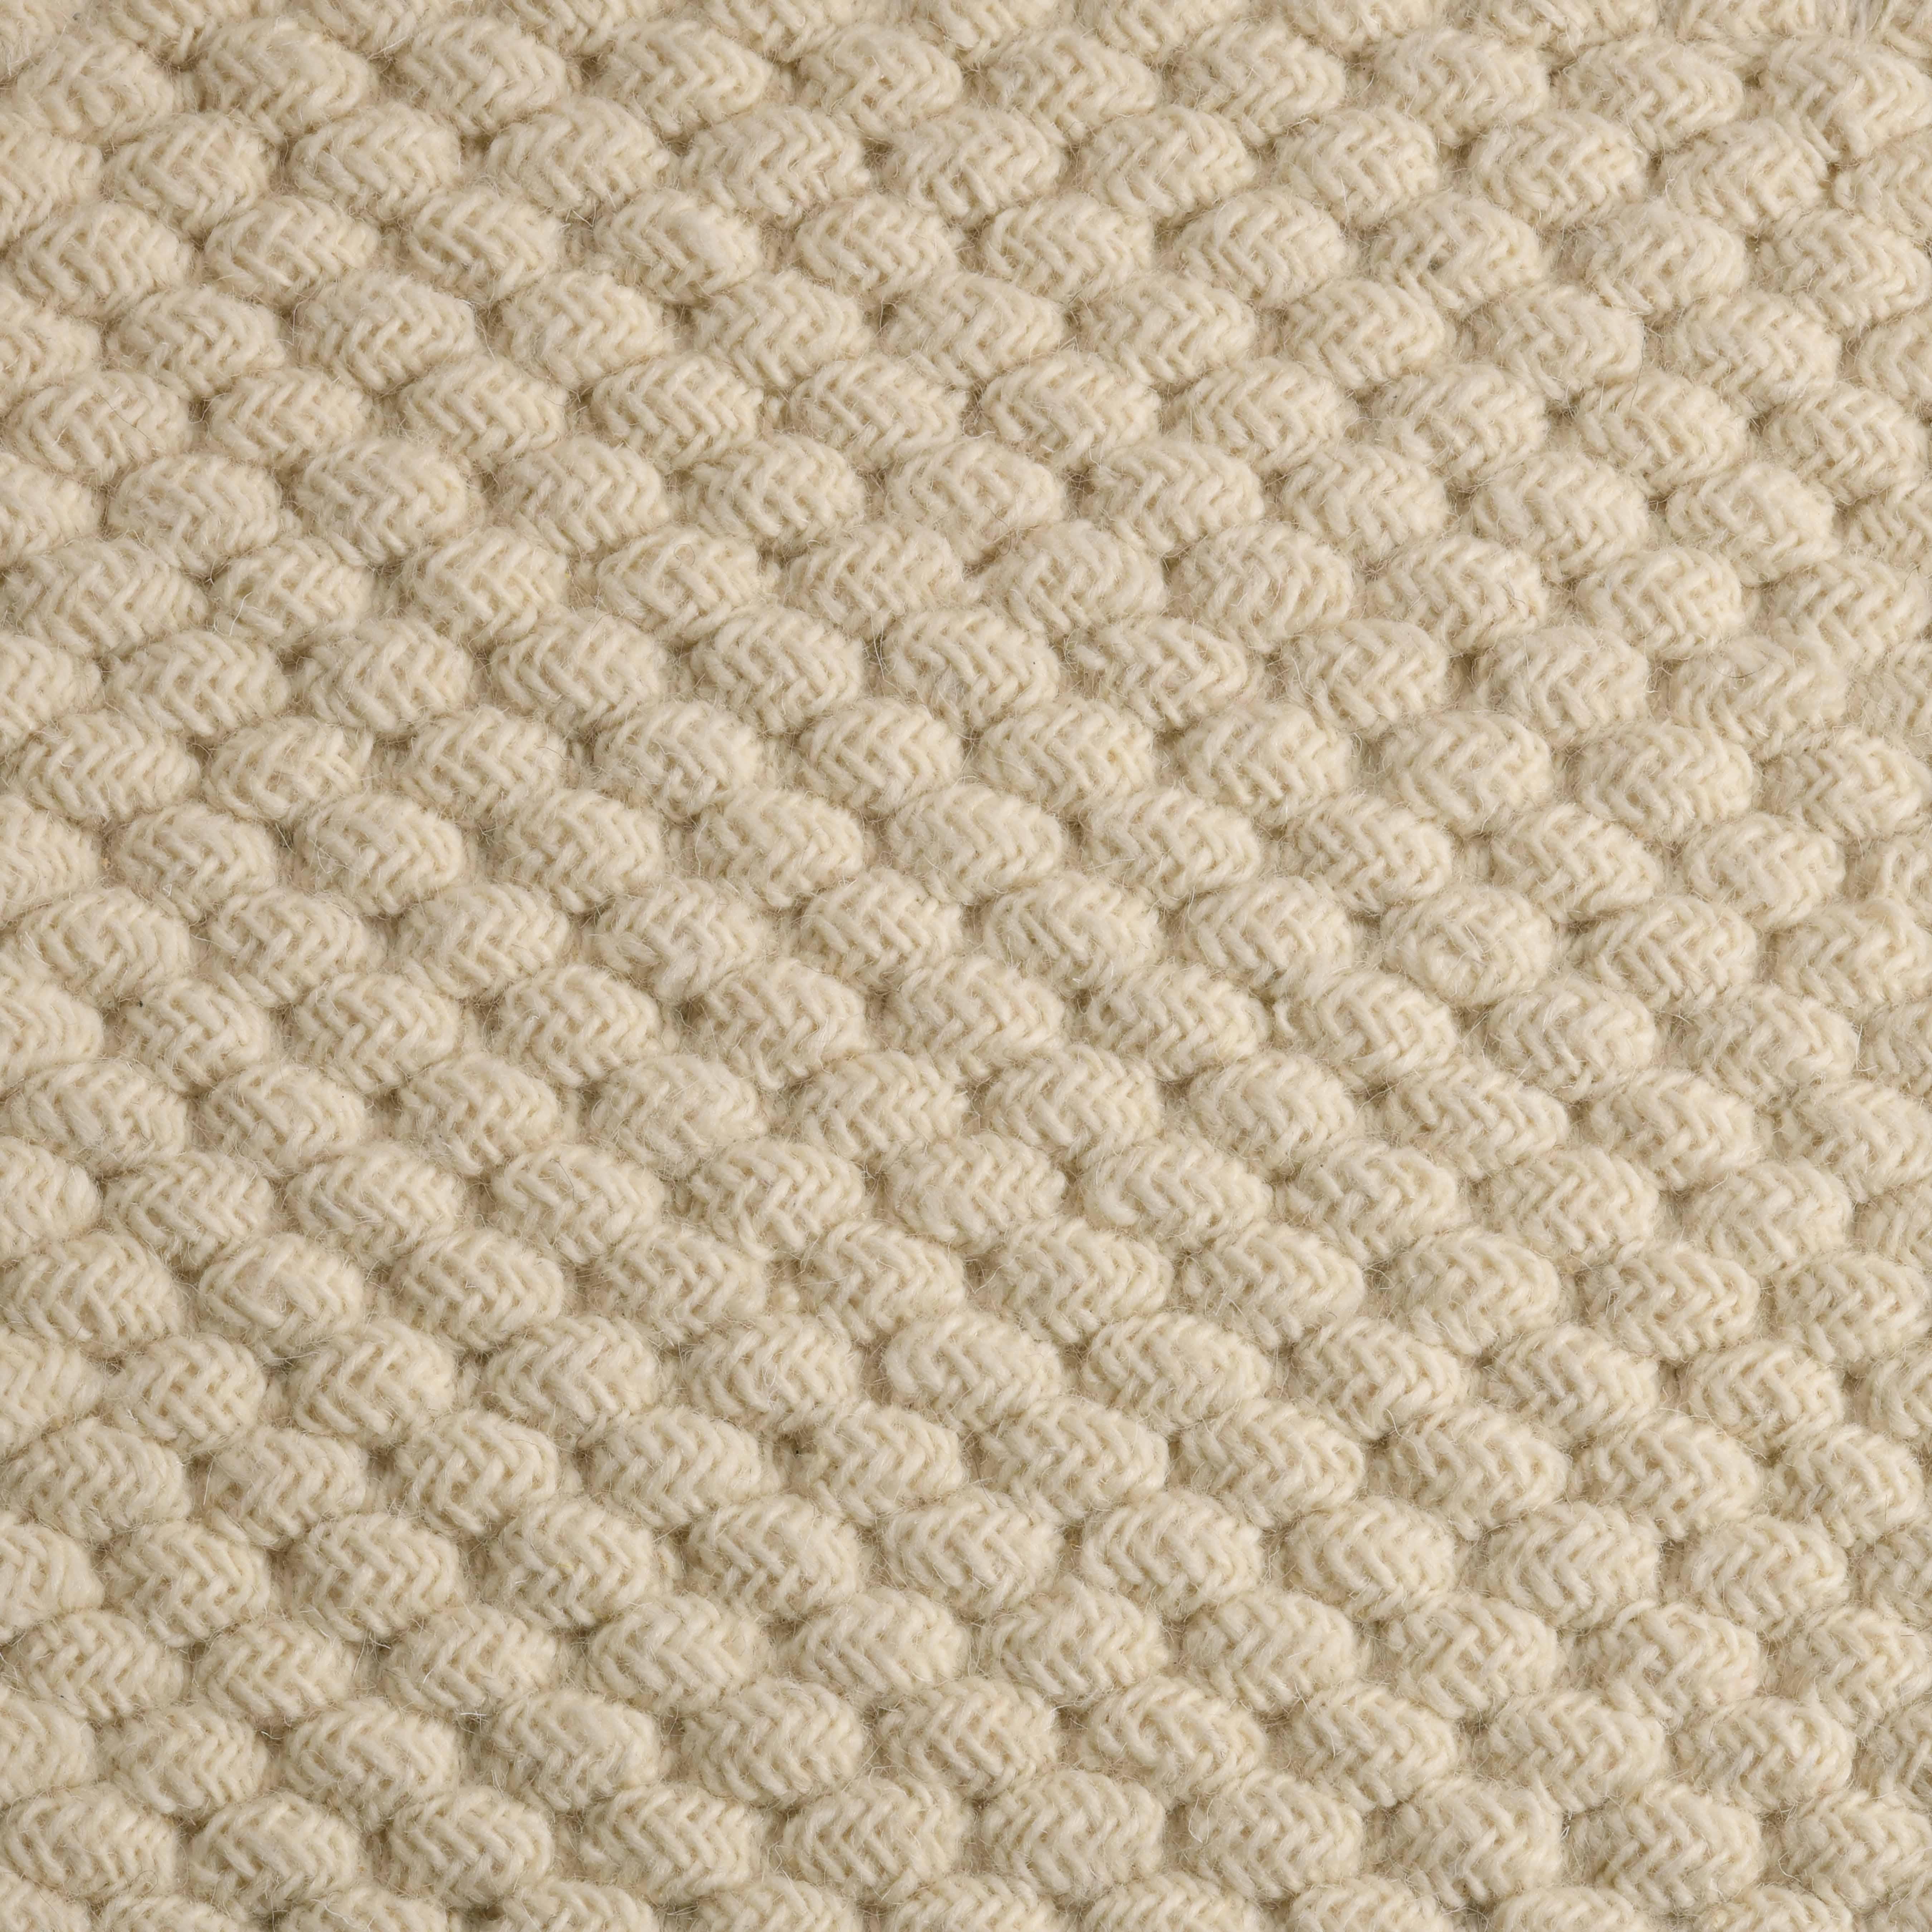 Acia, Ivory, Handwoven Face: 60% Undyed NZ Wool, 40% Undyed MED Wool, 8' x 10' For Sale